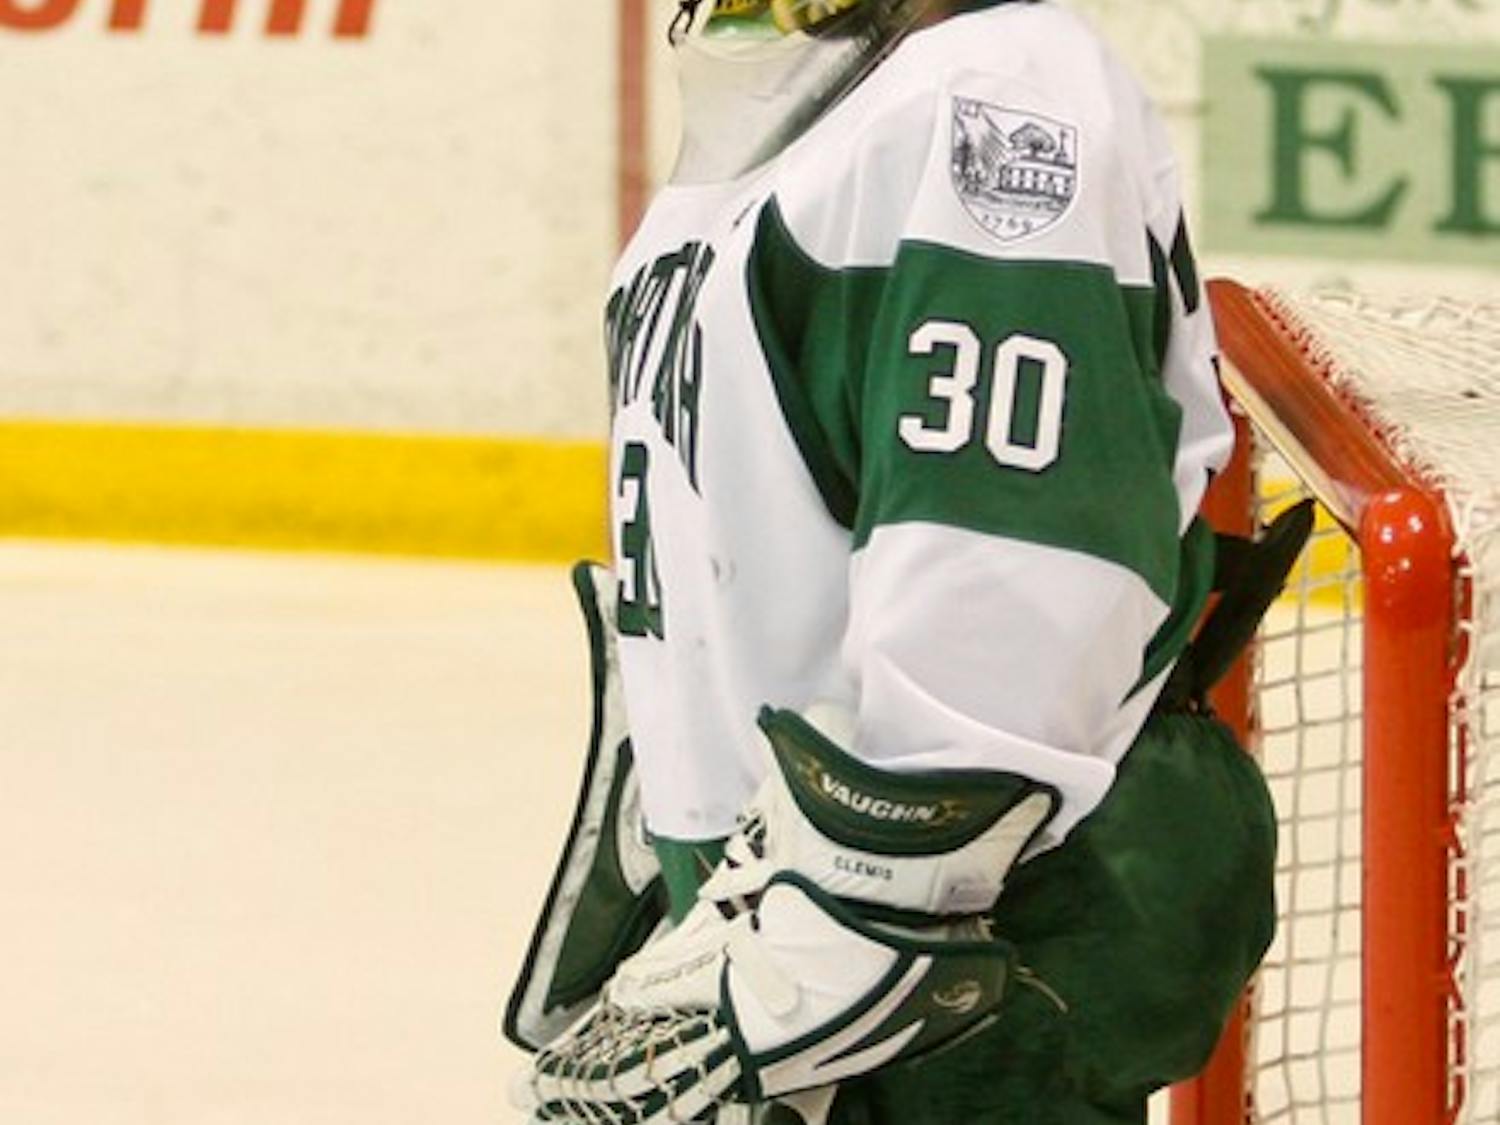 Big Green women's hockey goalie Carli Clemis '09 was named to the ESPN The Magazine Academic All-District first team on Thursday.